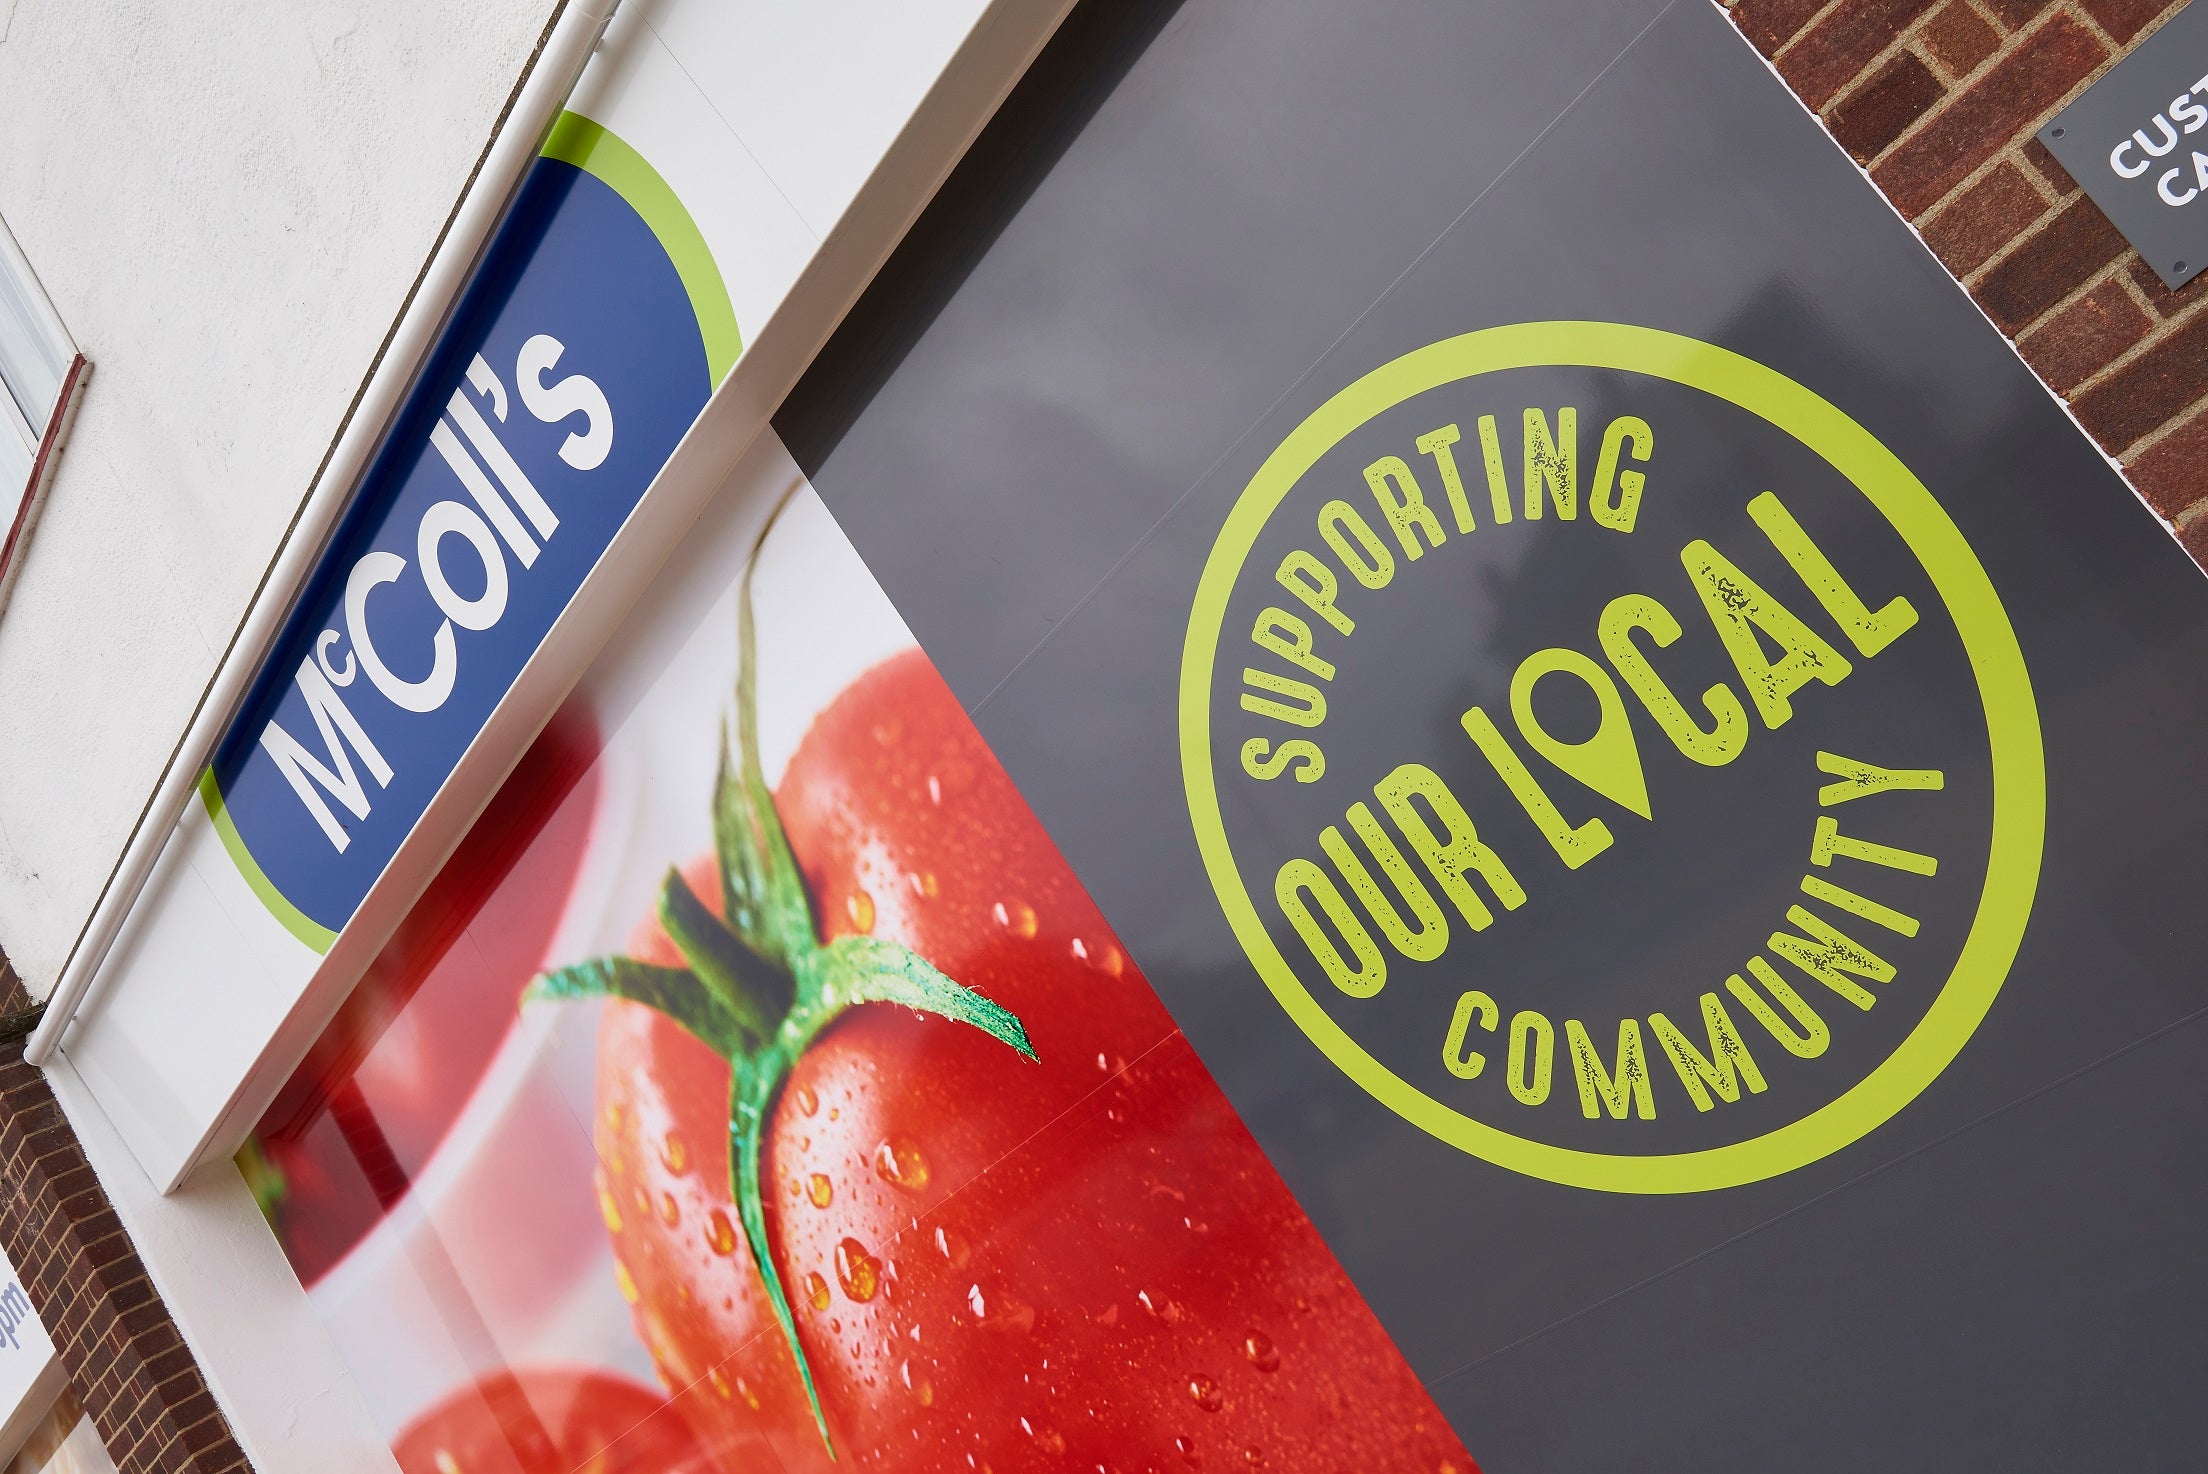 Convenience store chain McColl’s has said it is seeing signs of a recovery from supply chain disruption, but warned over an ongoing hit to sales (PA)